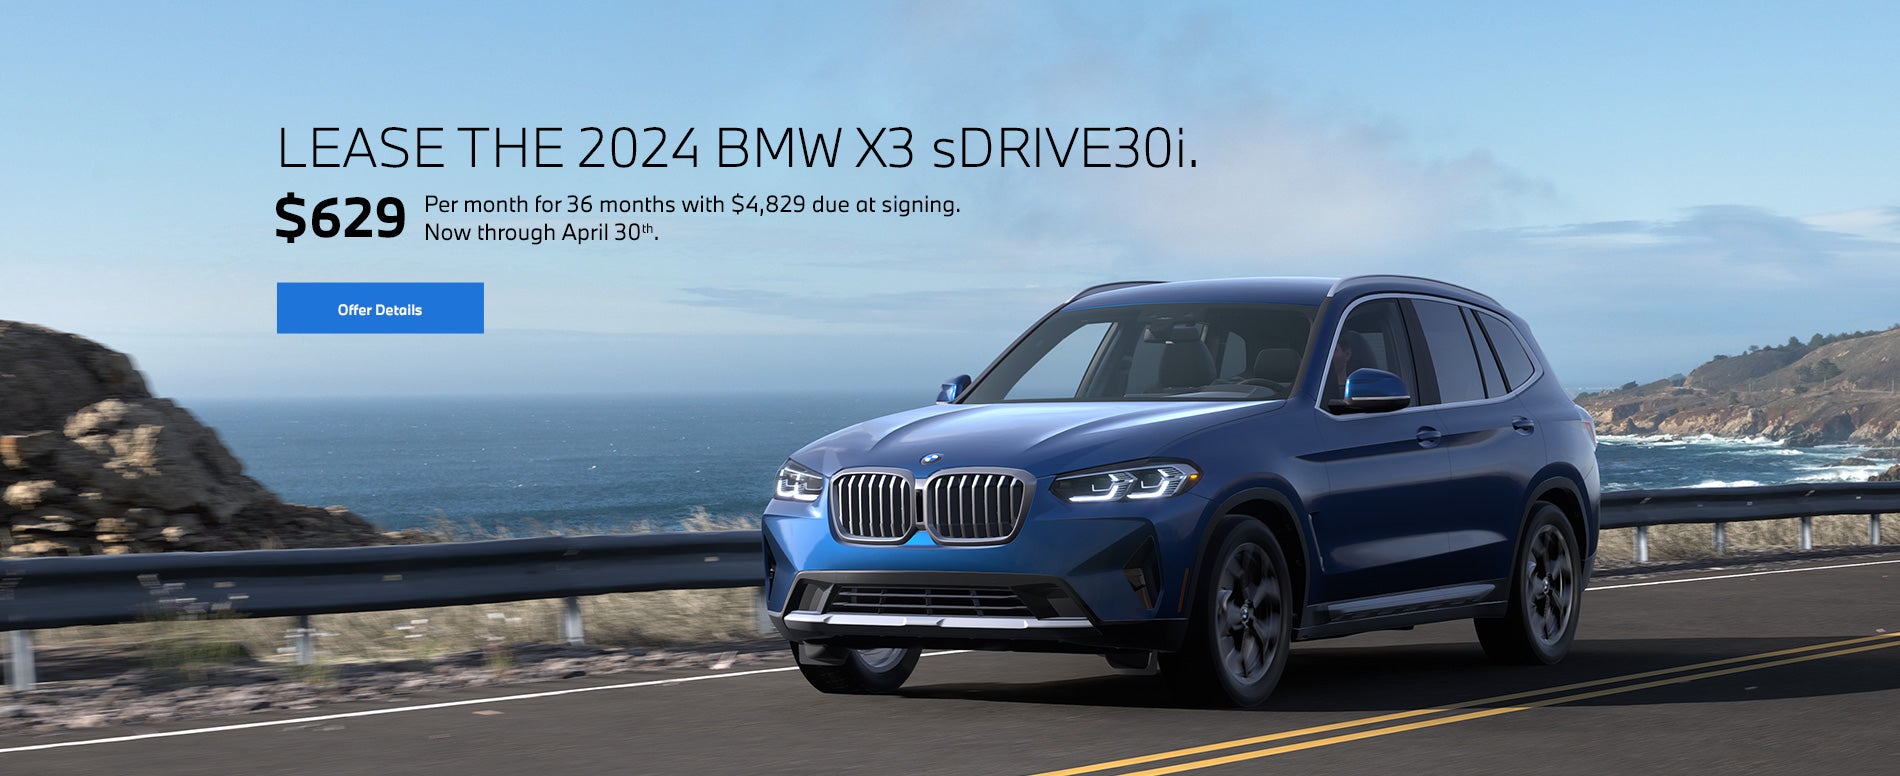 2024 X3 lease starting at $629 per month for 36 mo